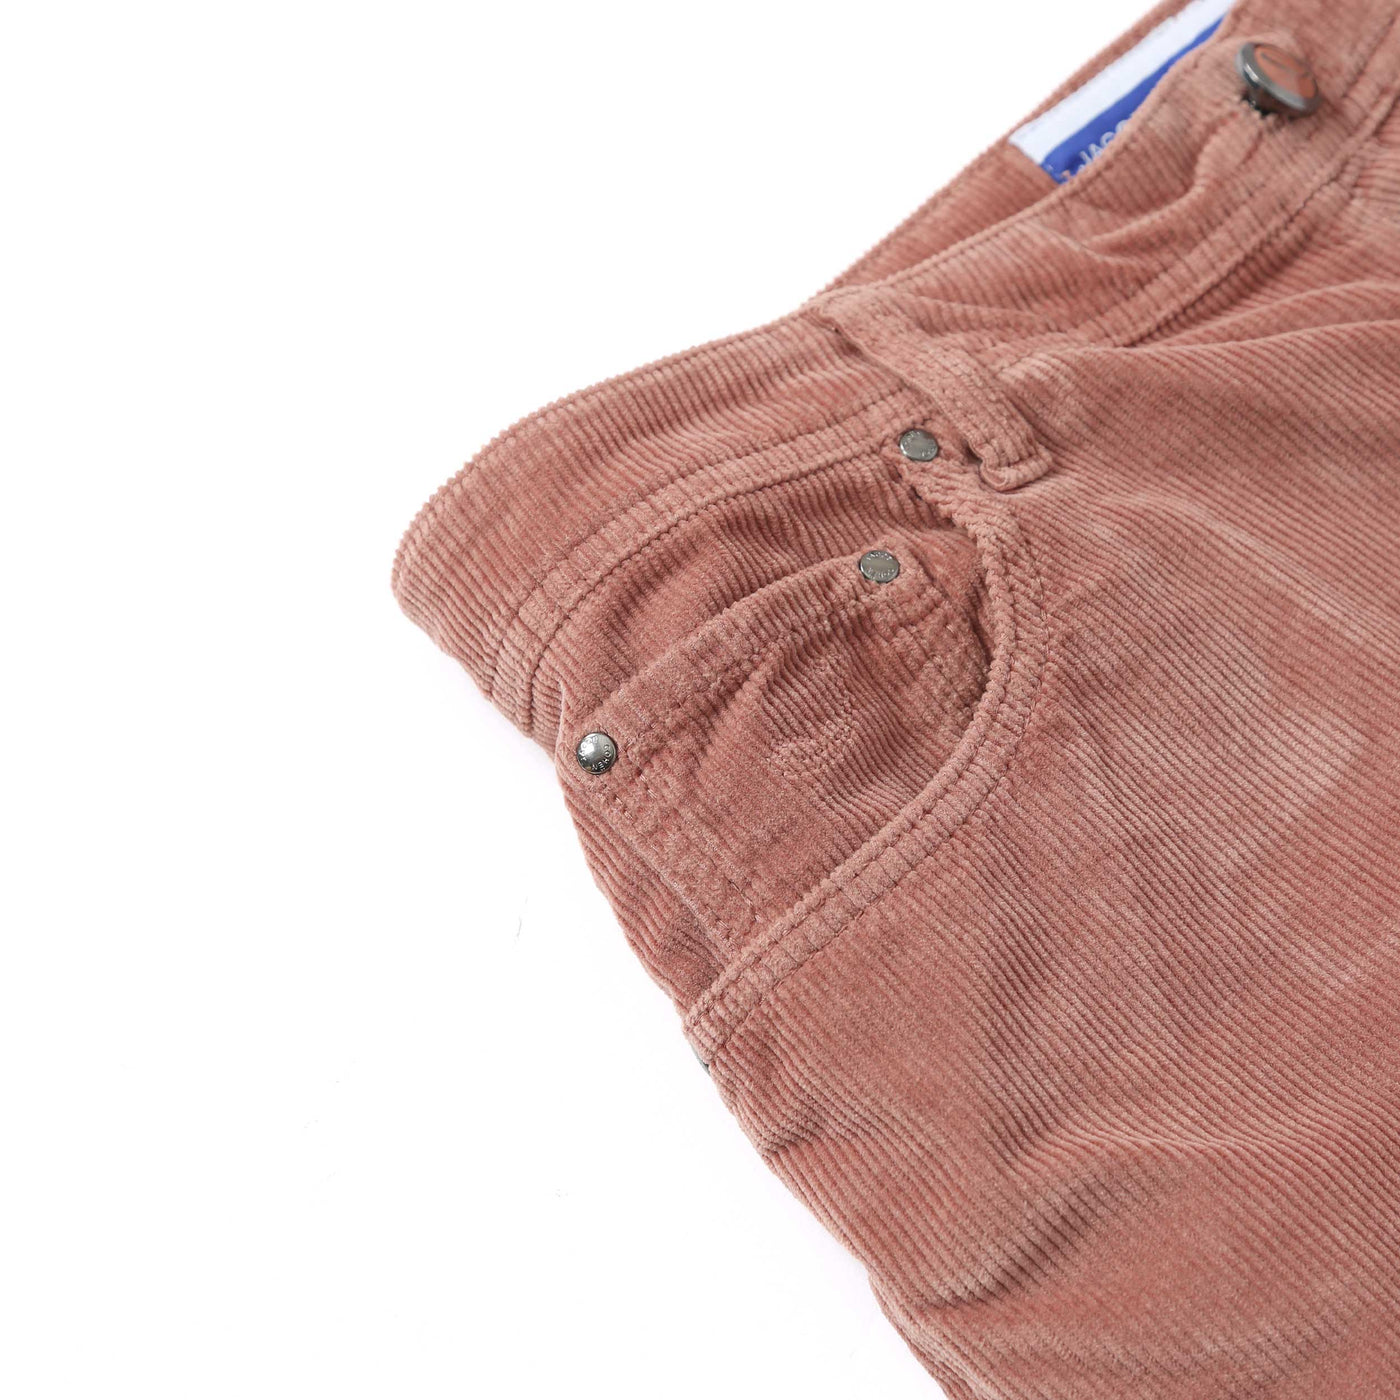 Jacob Cohen Nick Cord in Dusty Pink Pocket